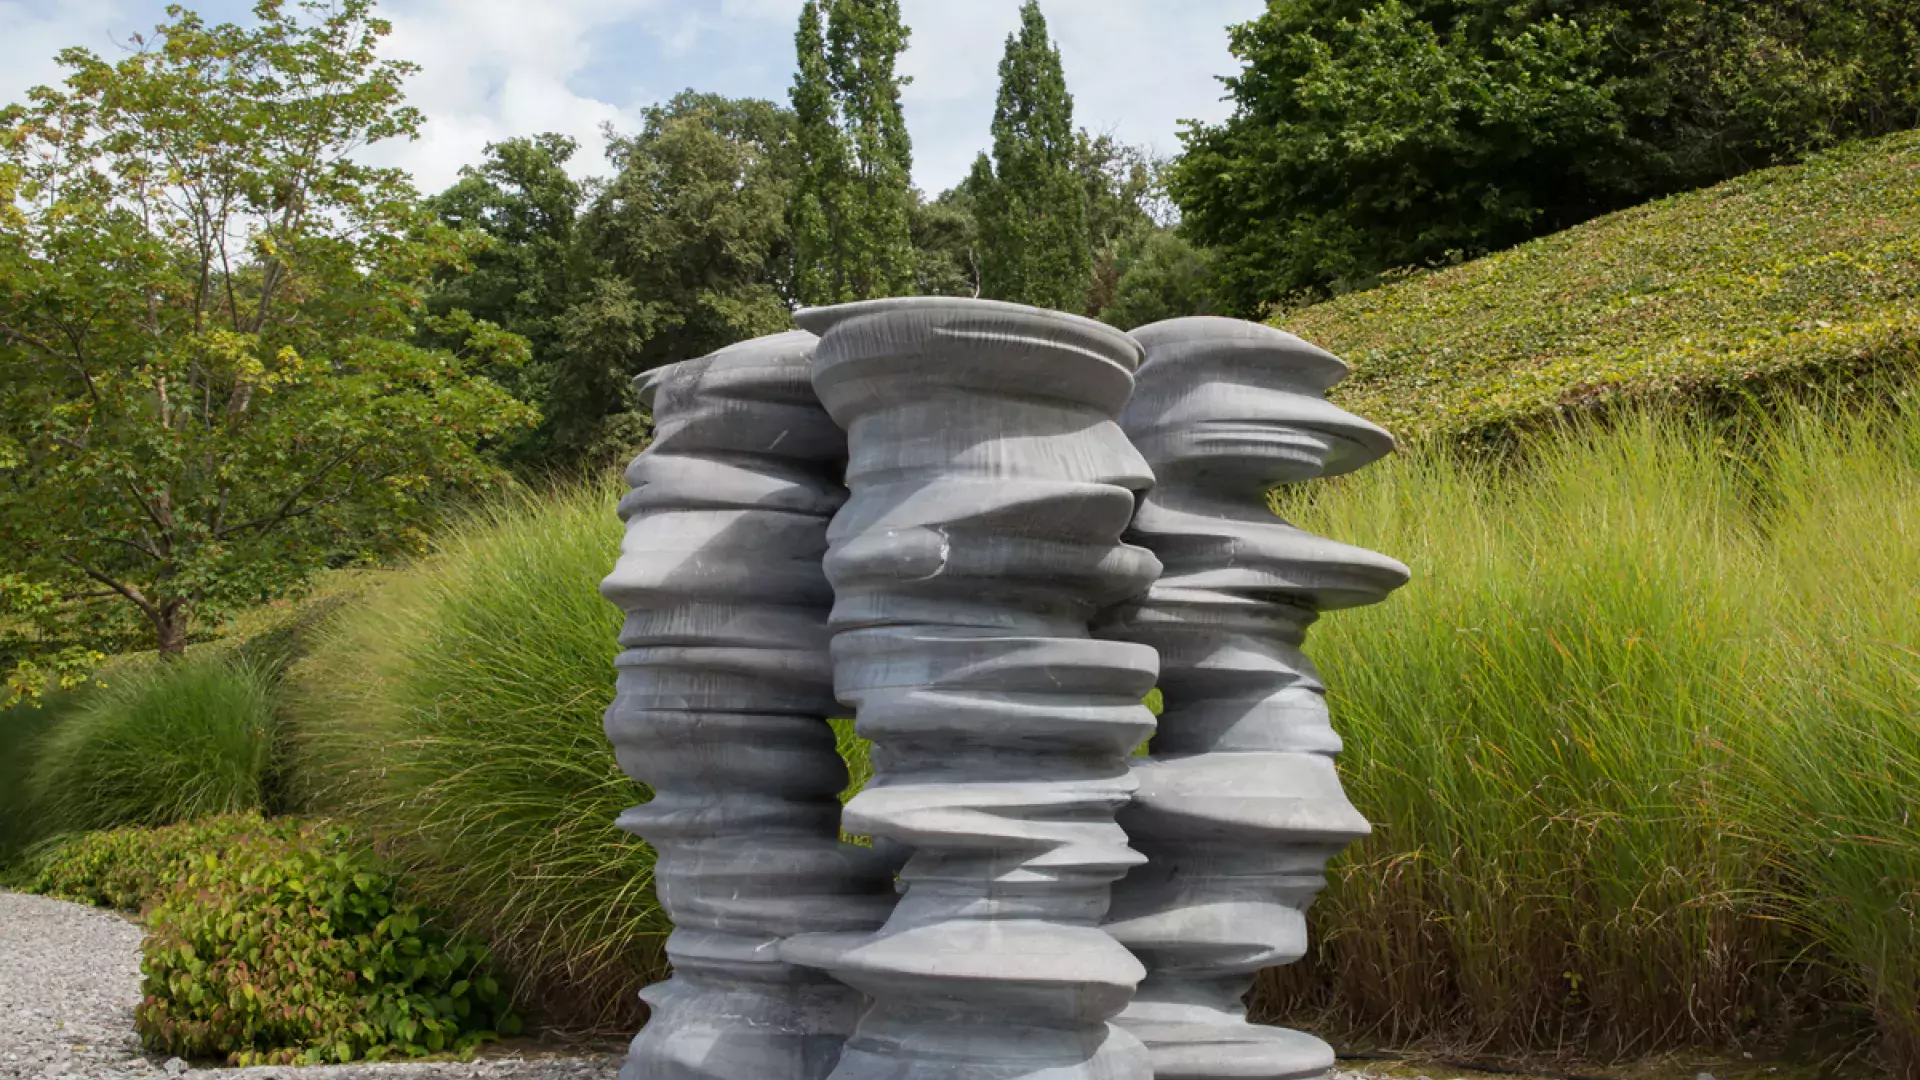 Grey stone sculpture in front of grass and trees